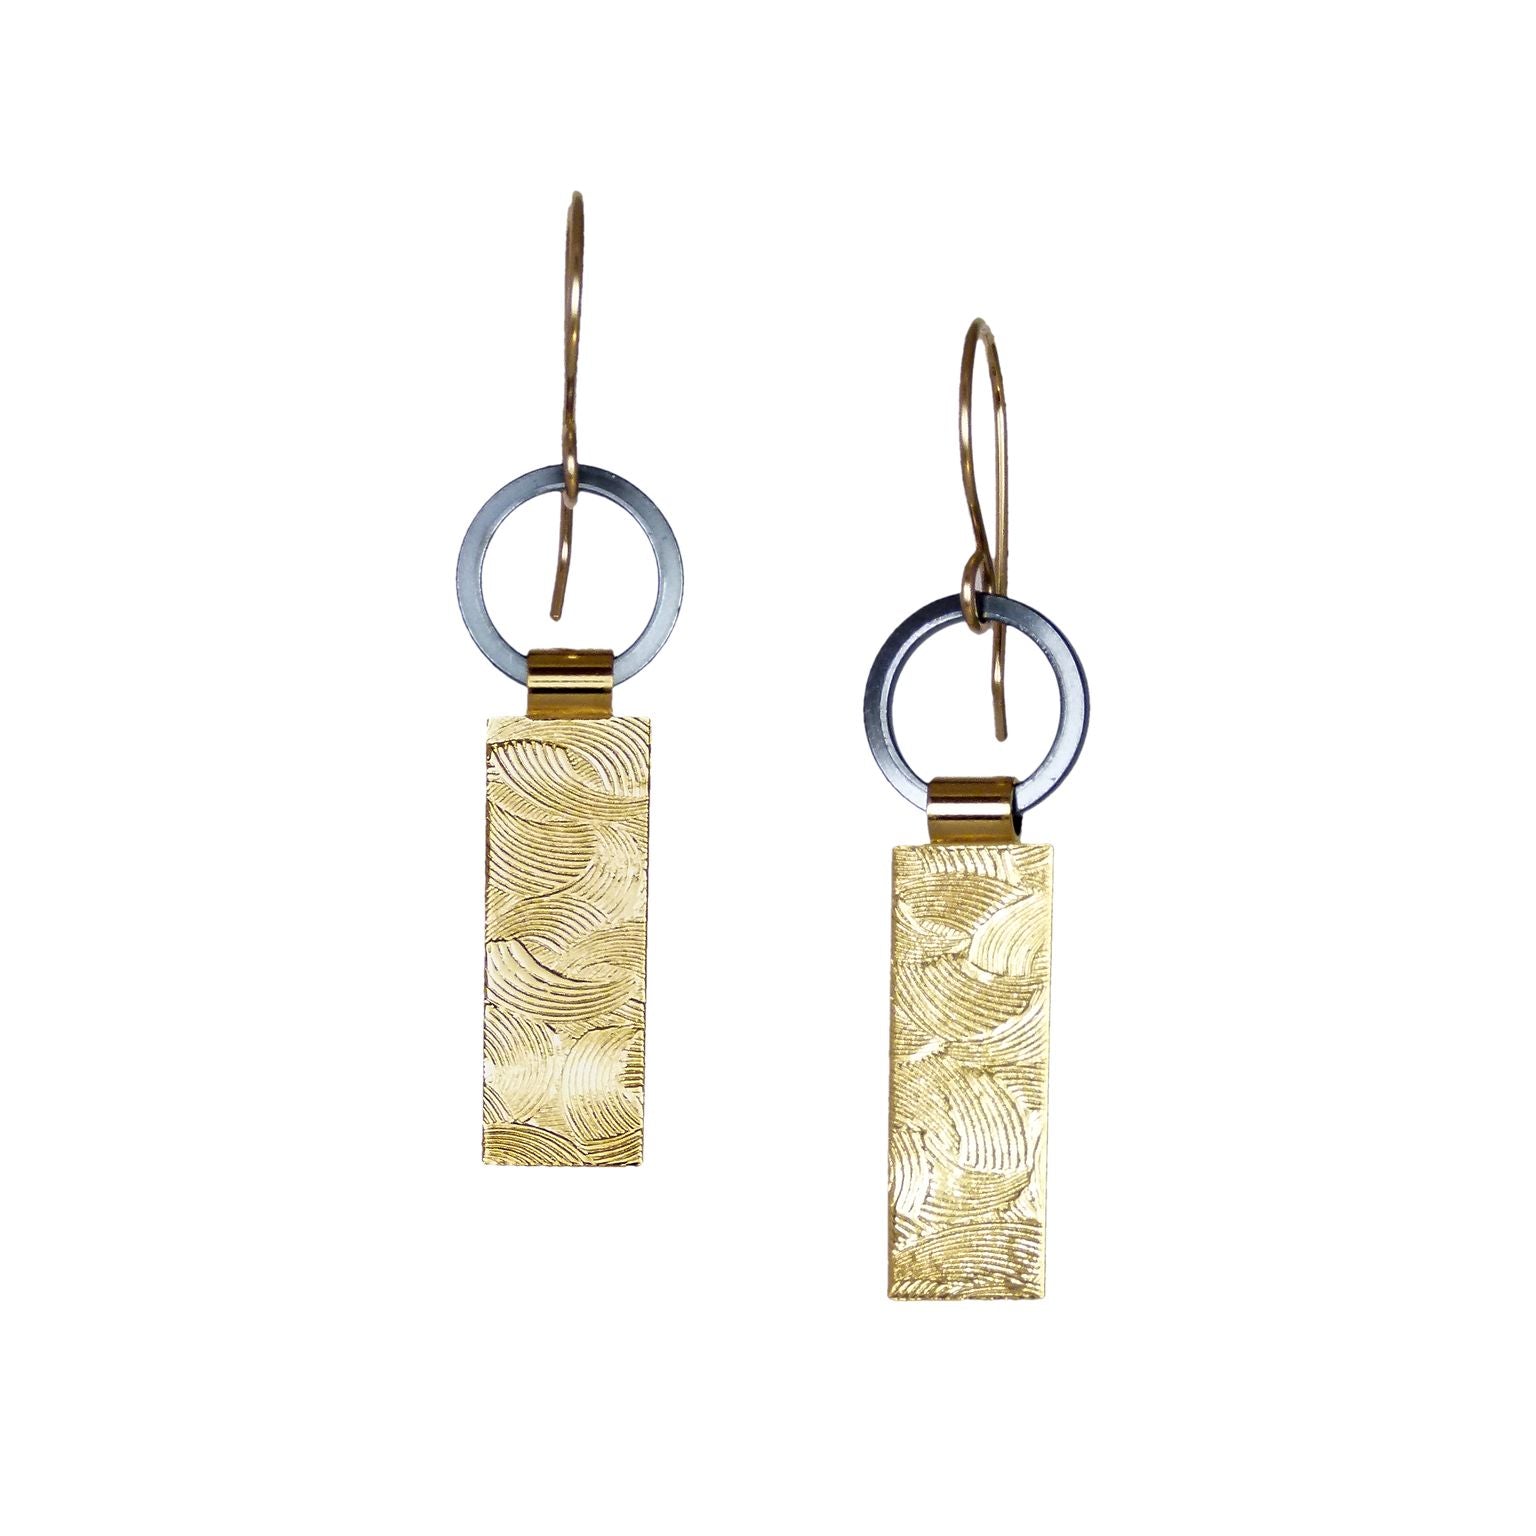 1 Tab Textured Earrings - Oxidized Silver & Gold